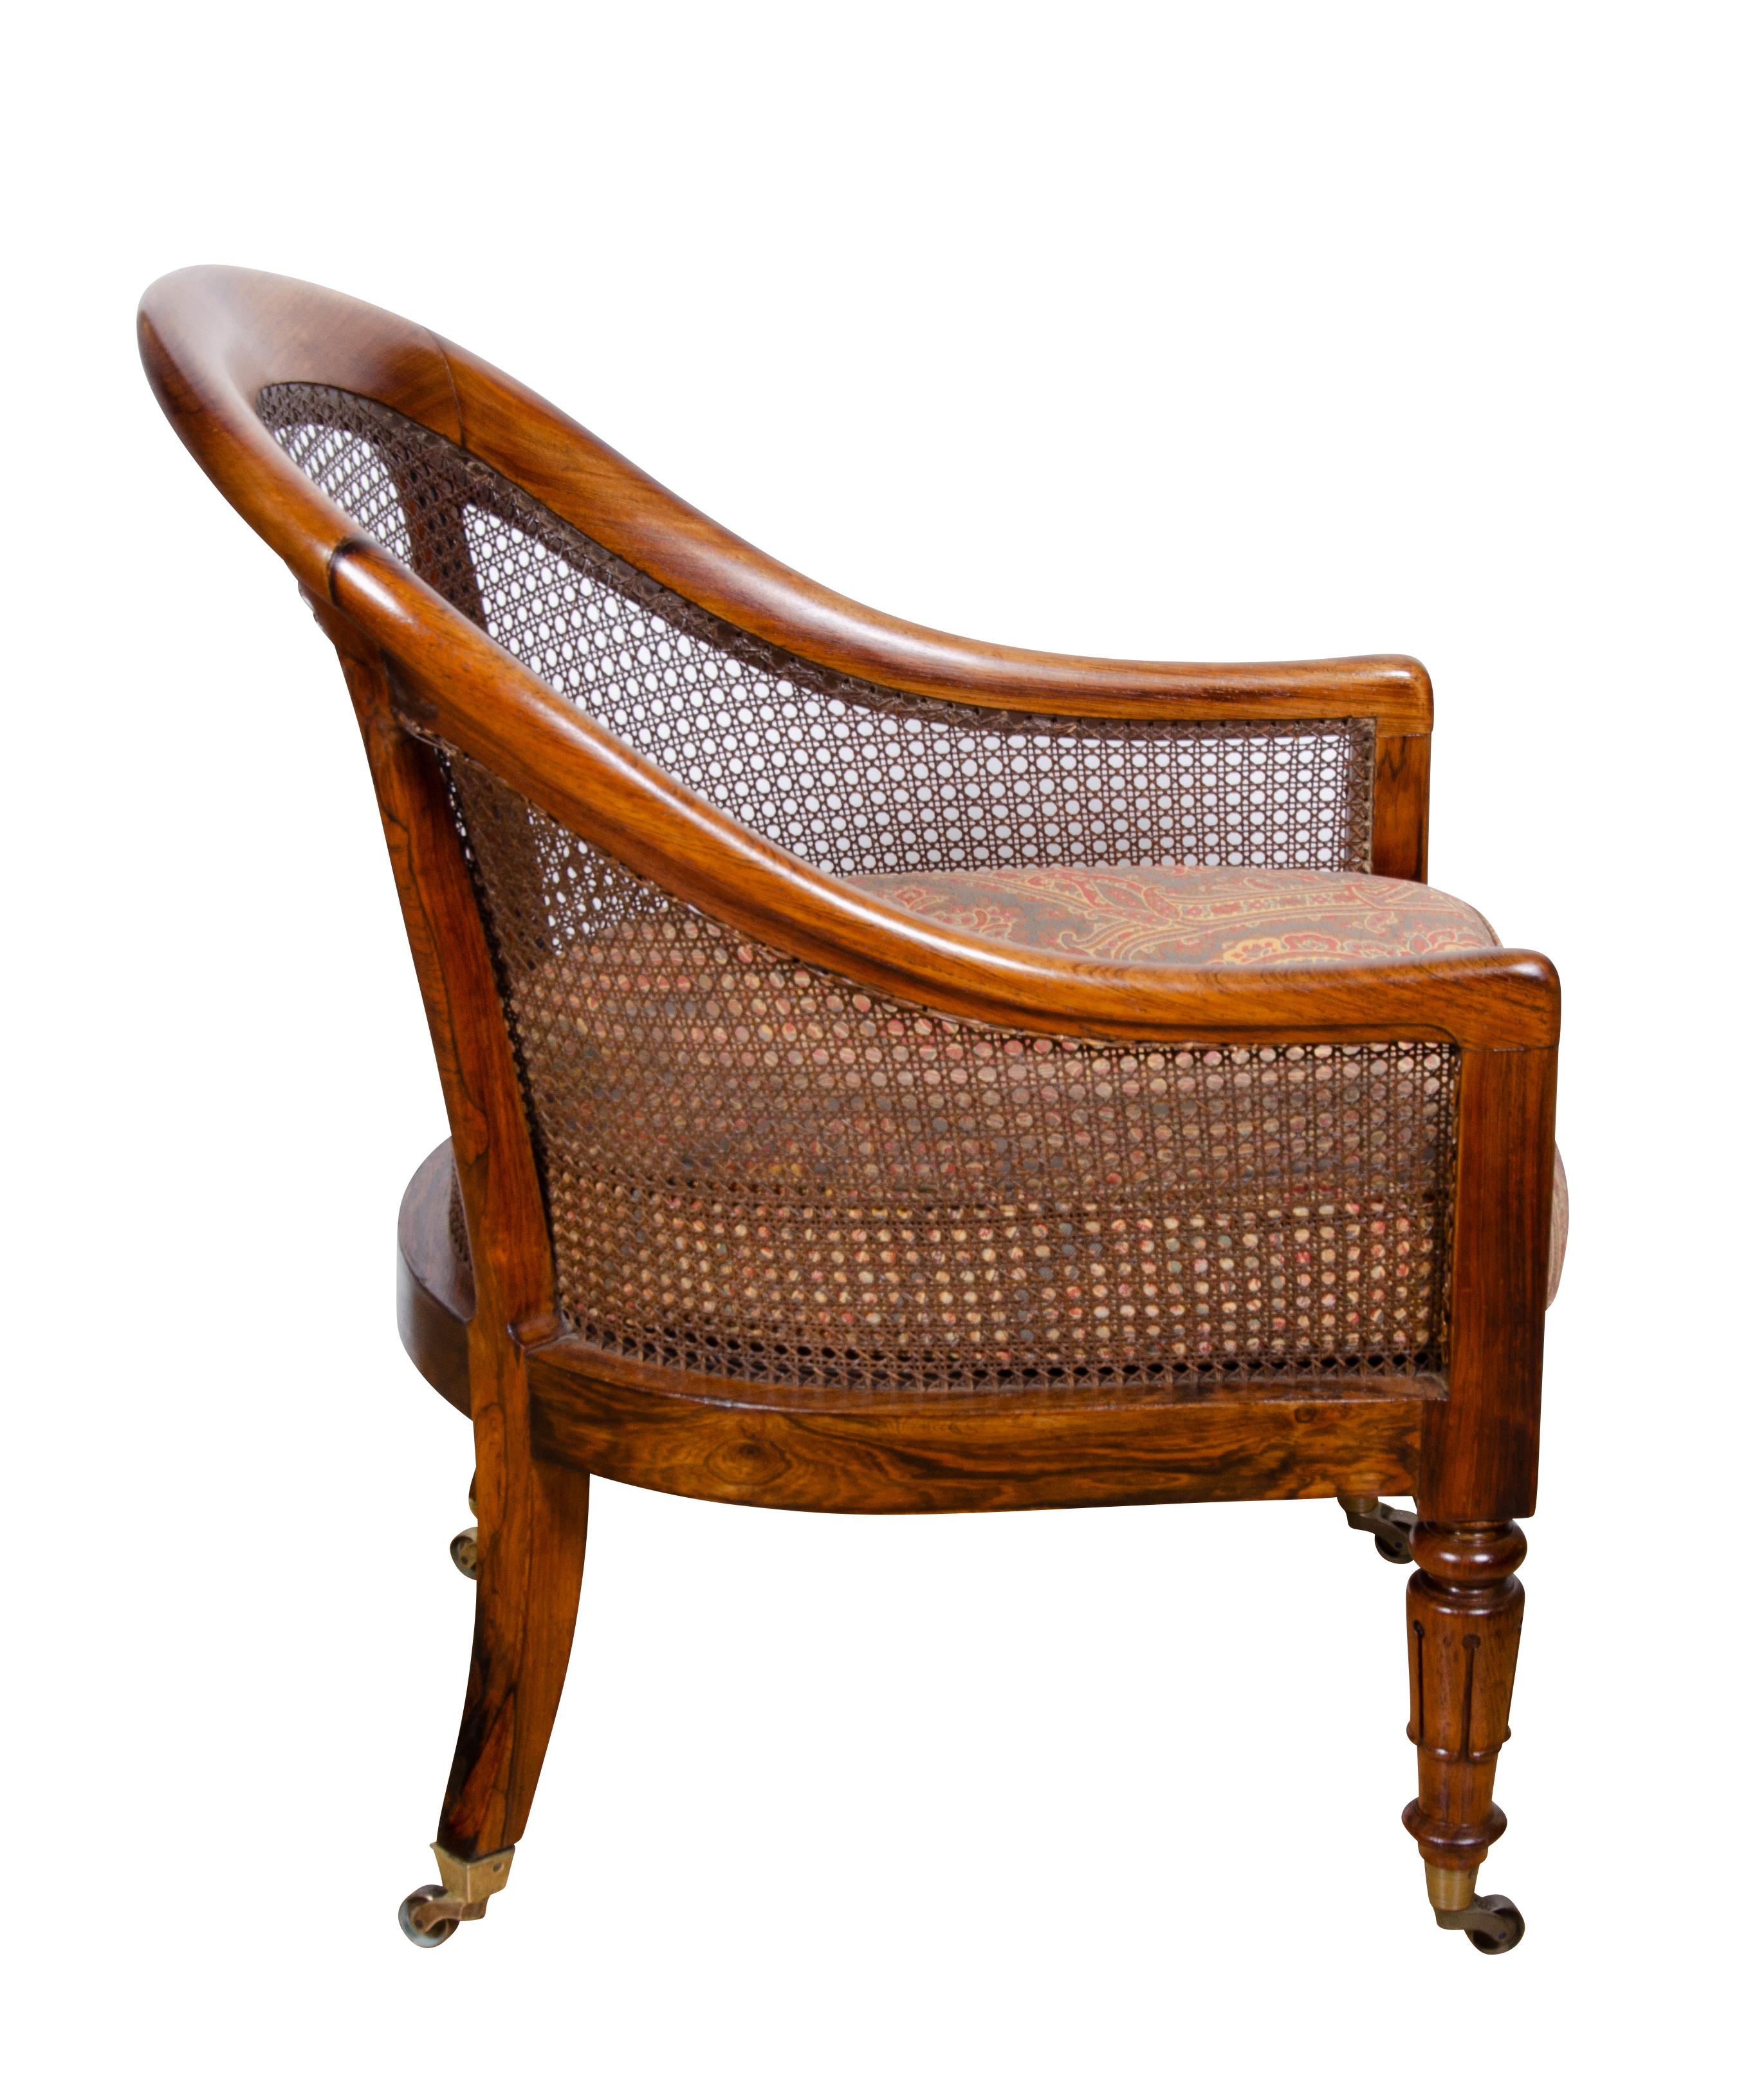 Early 19th Century Pair of William IV Rosewood Tub Chairs